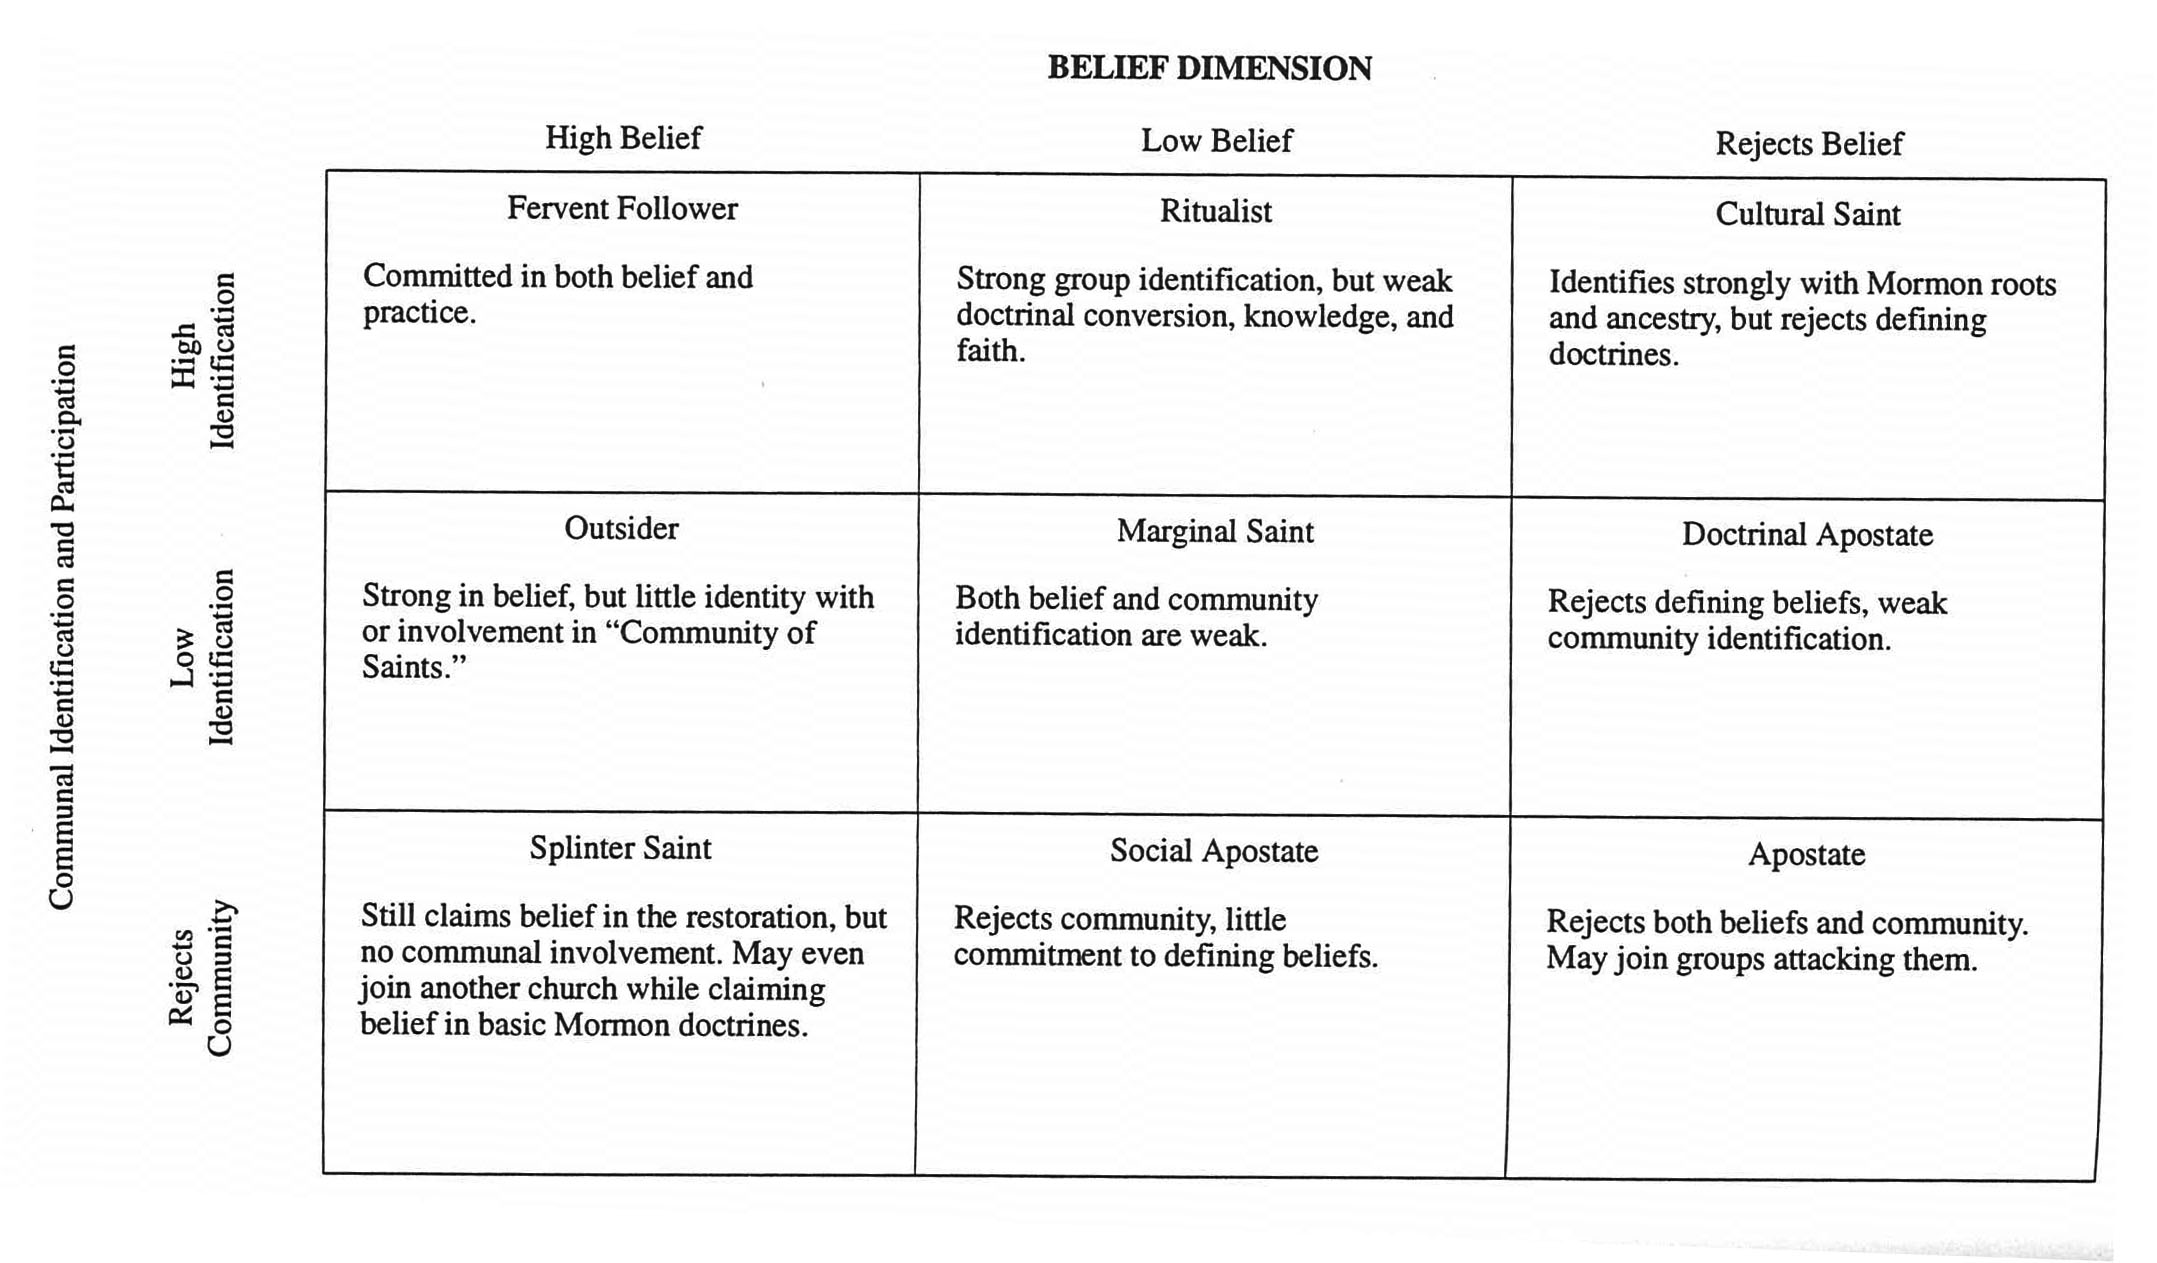 A Typology of LDS Belief and Involvement in Their Religious Community